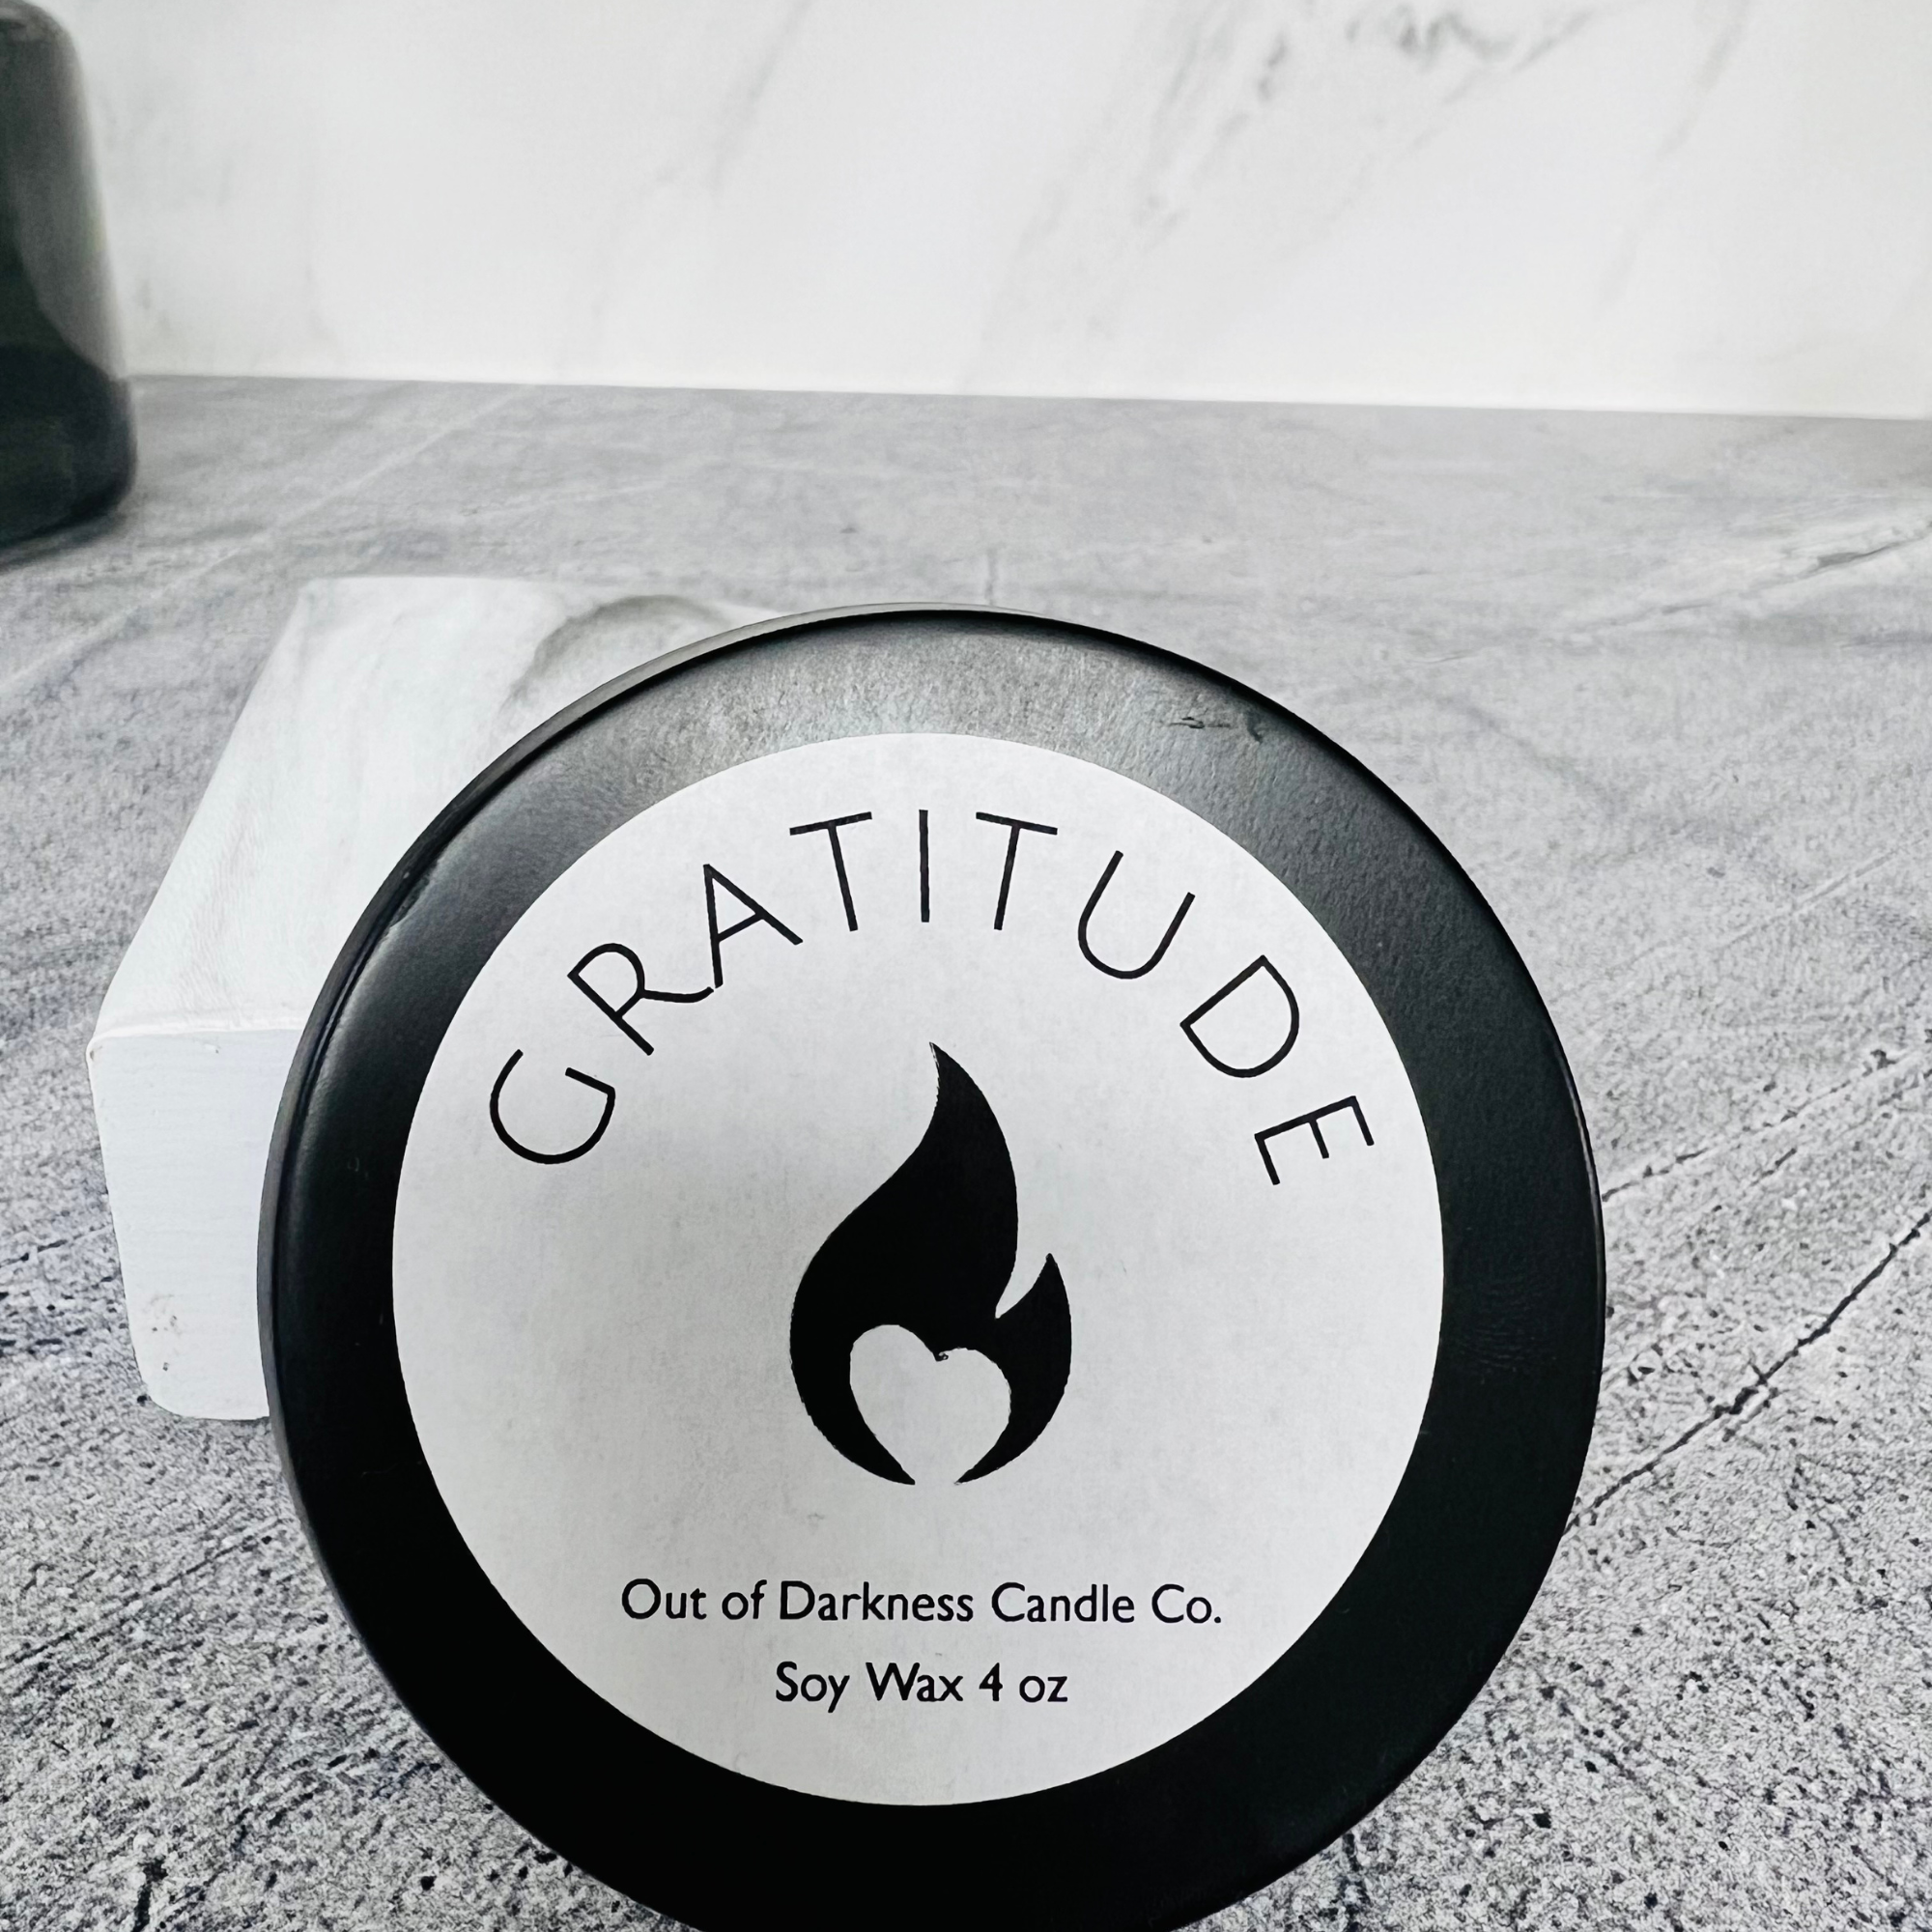 Black Candle Tin with White label on top black flame logo in the middle says gratitude around the flame , bottom of label says Out of Darkness Candle Co. Soy Wax 4 oz 